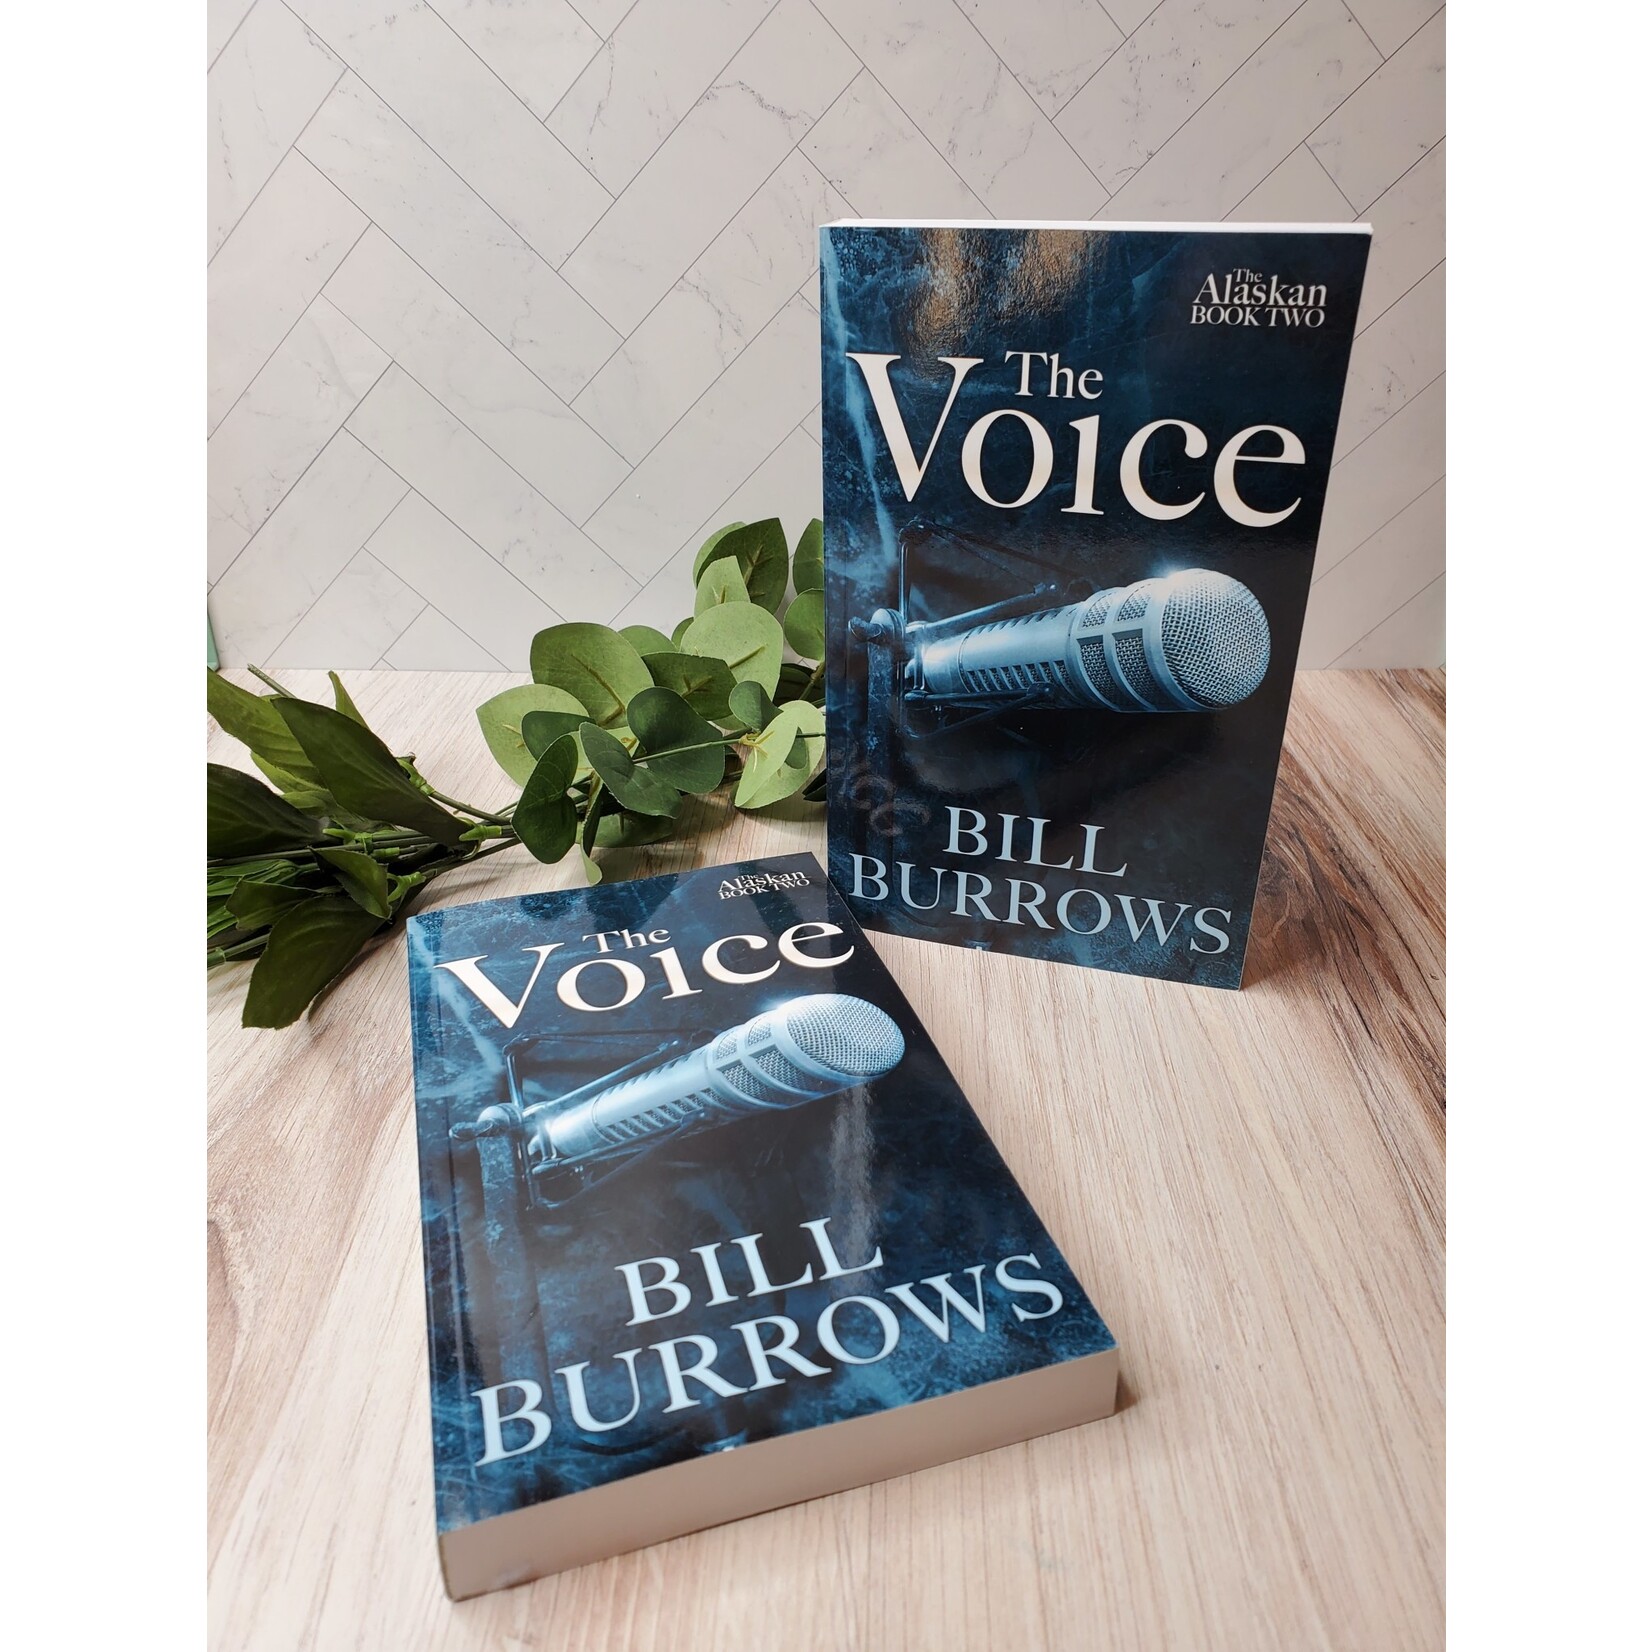 Bill Burrows "The Voice" - paperback book